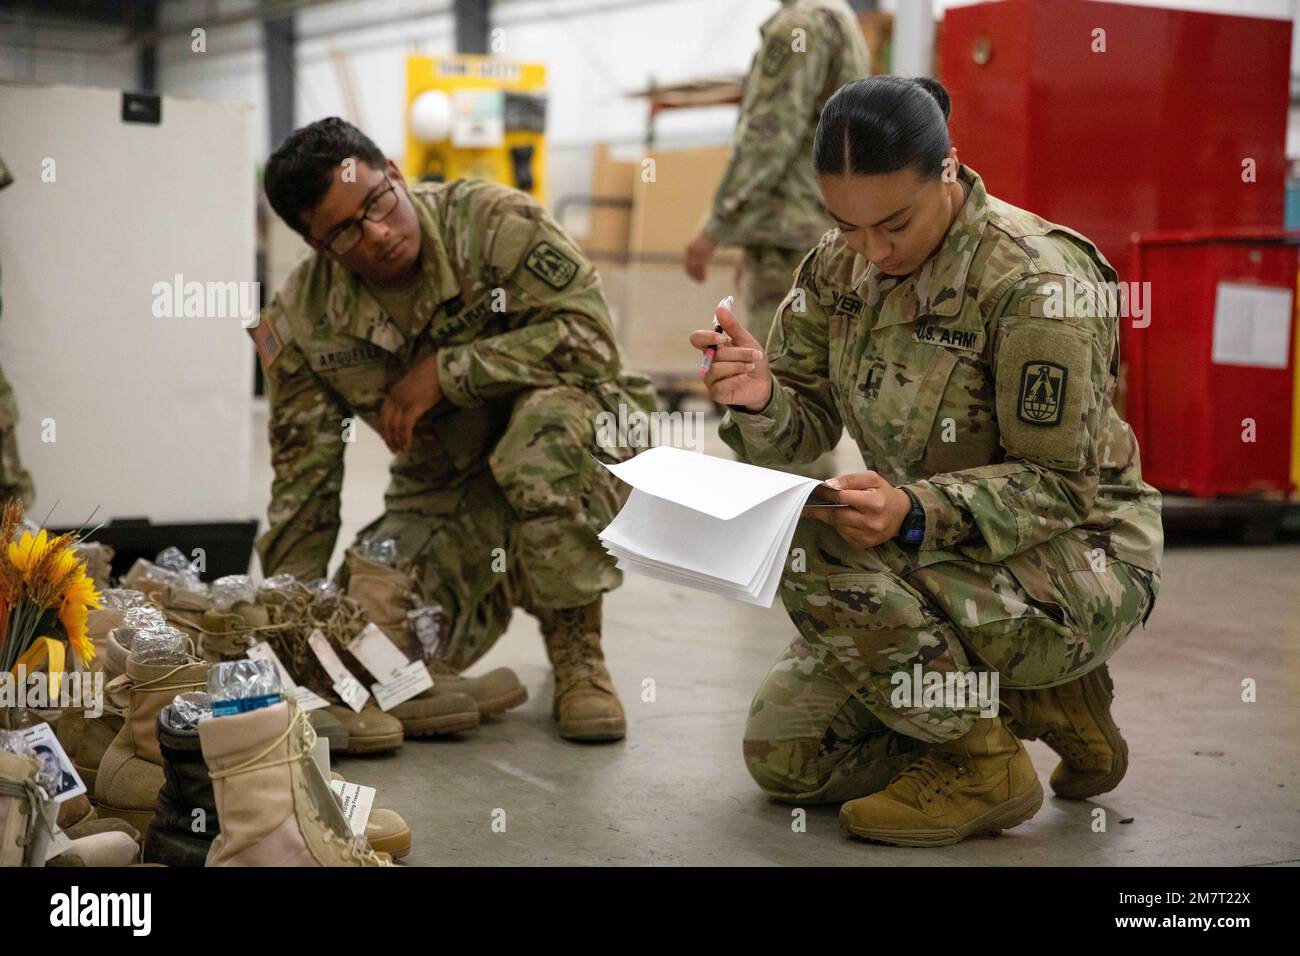 1st Lt. Andrea Viveros and Staff Sgt. Luz Arguello, Headquarters and Headquarters Company, 11th Signal Brigade, verify sorted boots while volunteering May 12, 2022, at Fort Hood, Texas, in preparation for the Memorial Remembrance Boot Display. This year marks the eighth annual display honoring those who gave the ultimate sacrifice. Each fallen Fort Hood service member is represented with a combat boot featuring the service member's name and photo, alongside an American flag. Stock Photo